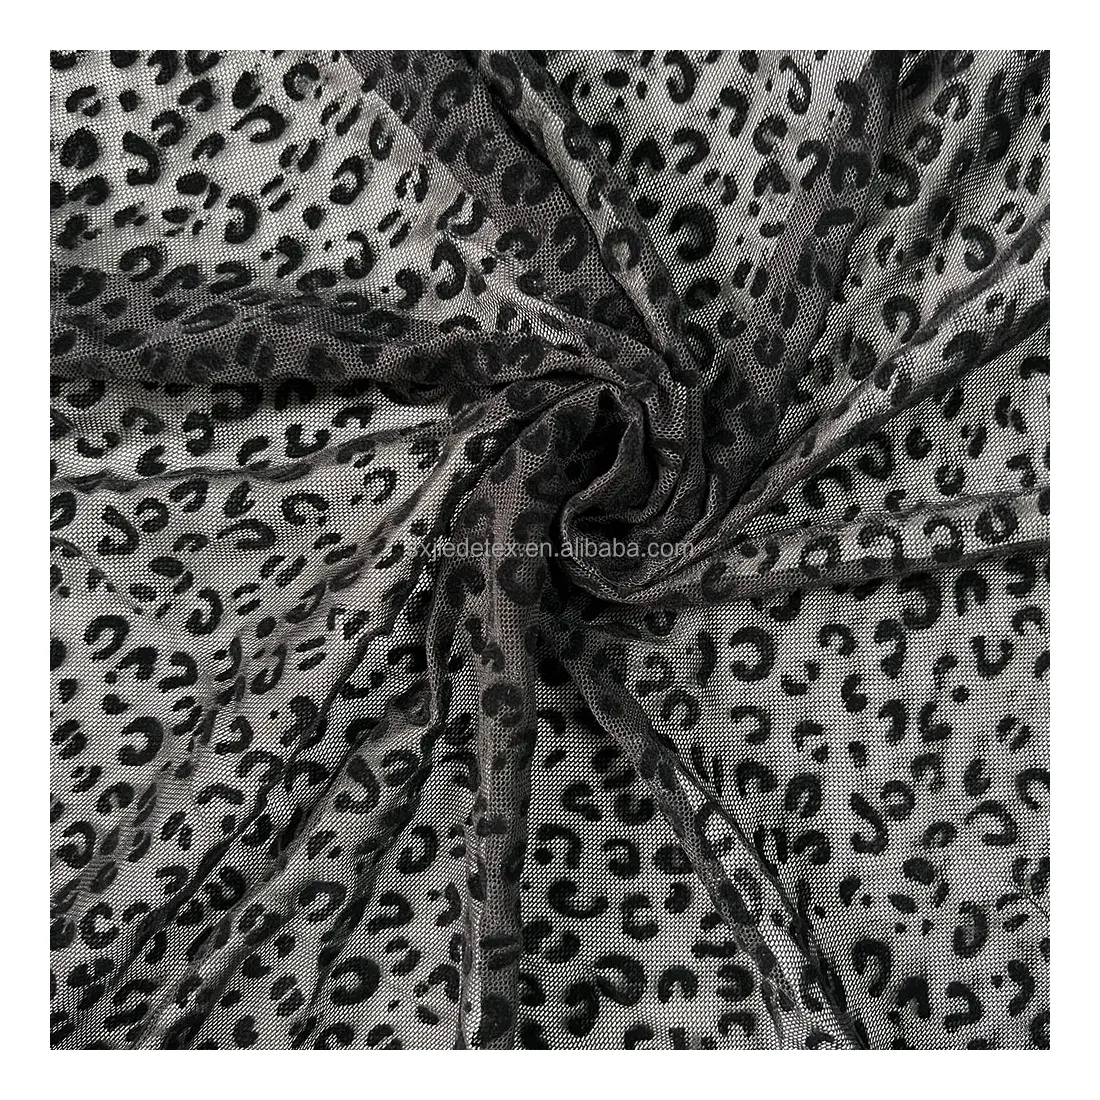 Eco-friendly Wholesale stretch flocking african lace fabric leopard print new design mesh net fabric flocking for dress